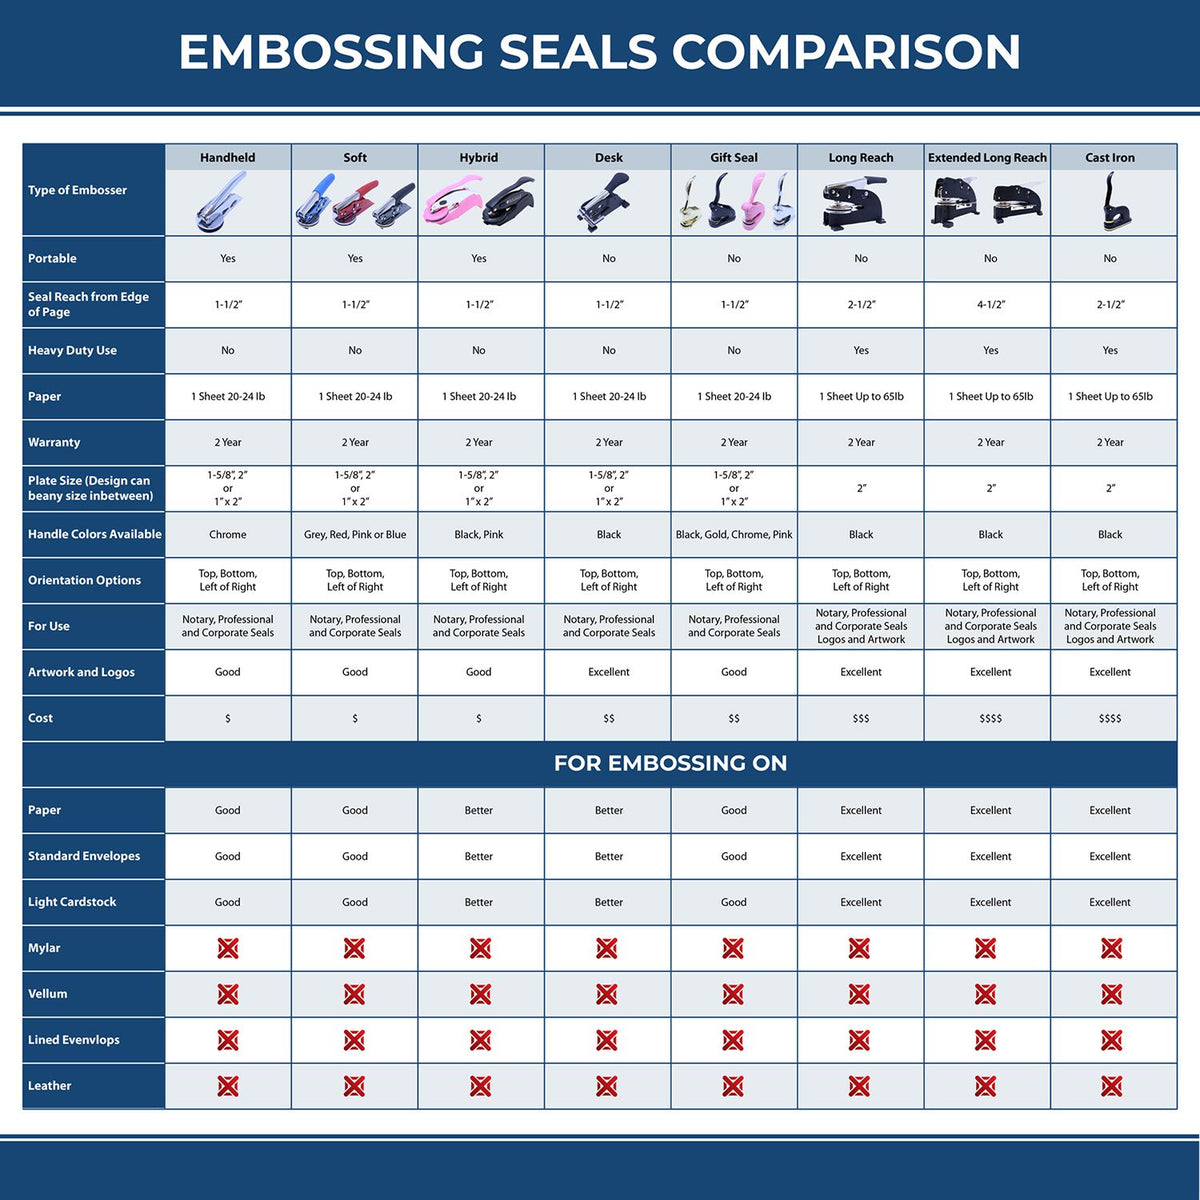 A comparison chart for the different types of mount models available for the Gift Michigan Architect Seal